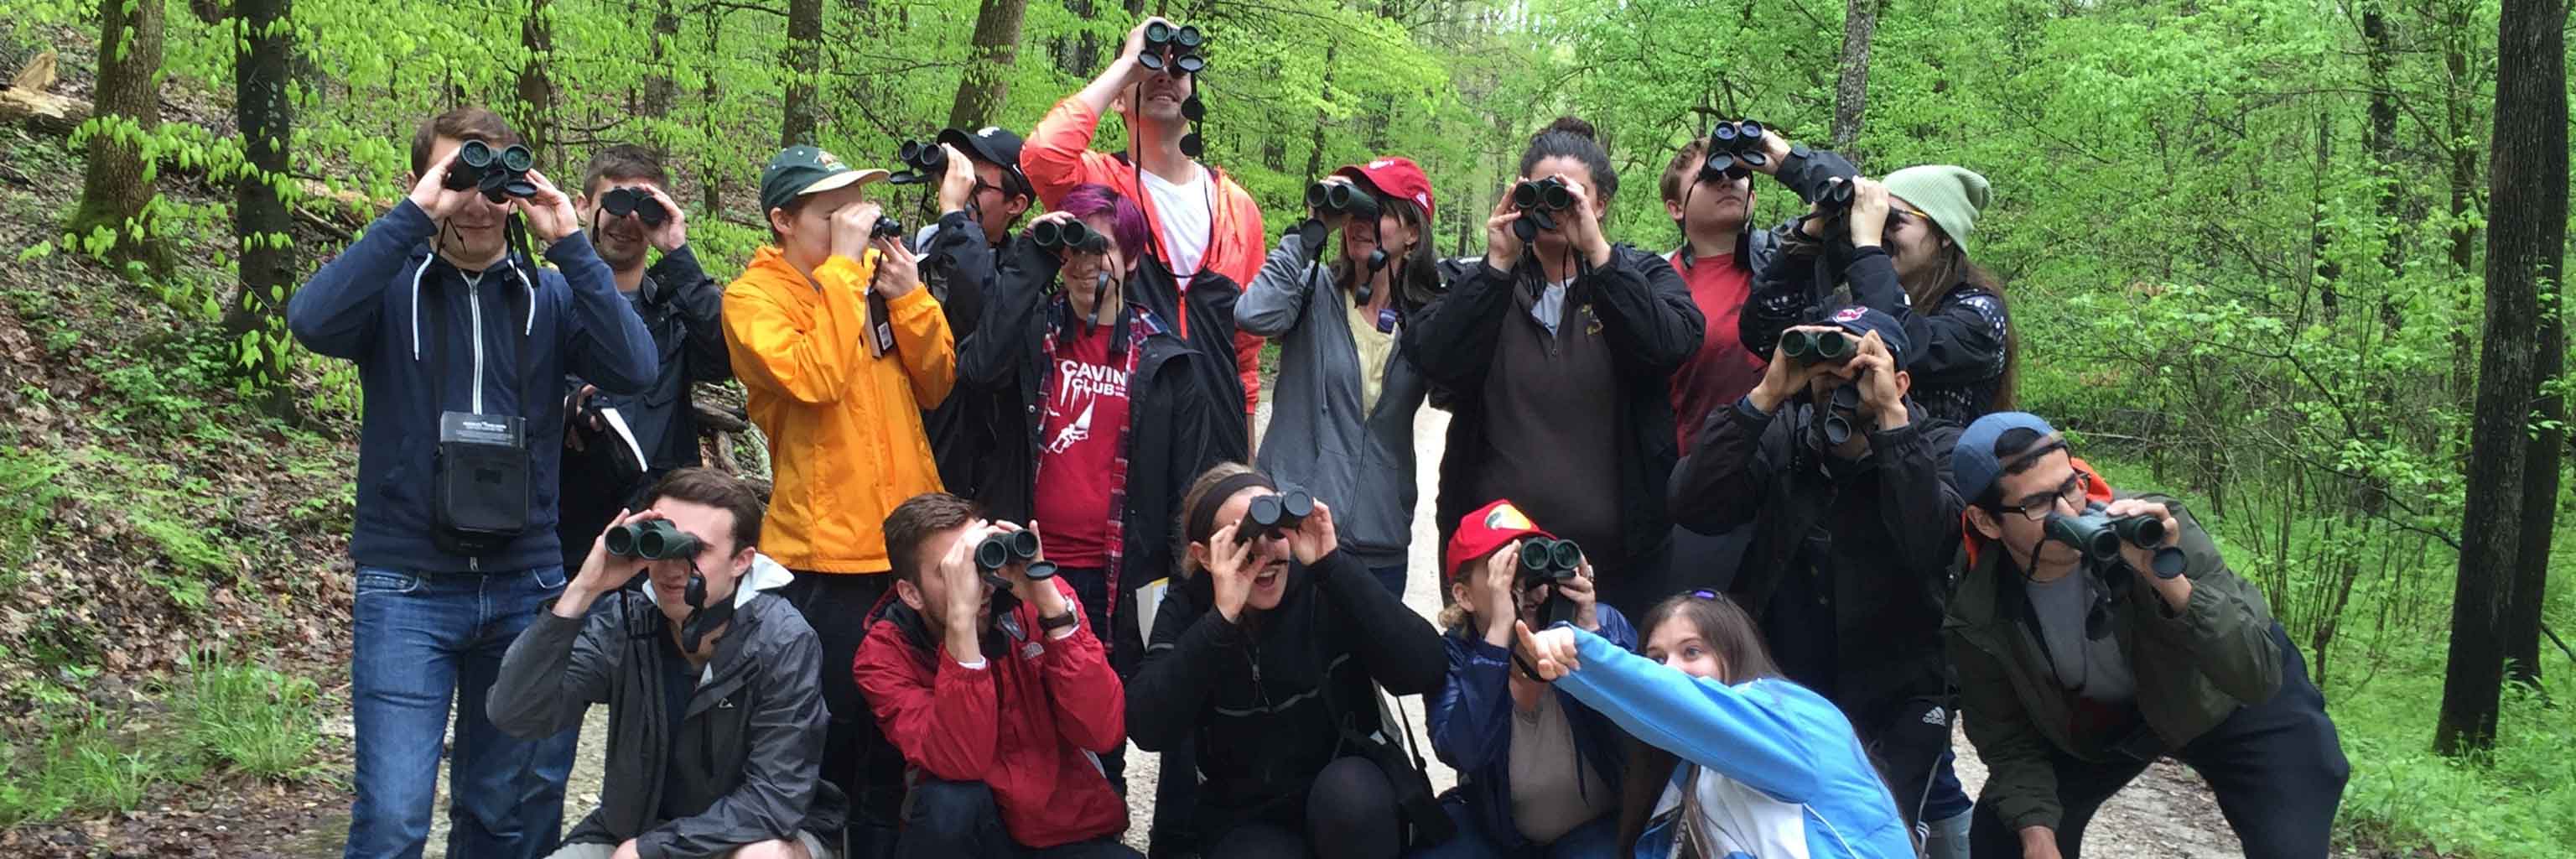 A group of students using binoculars